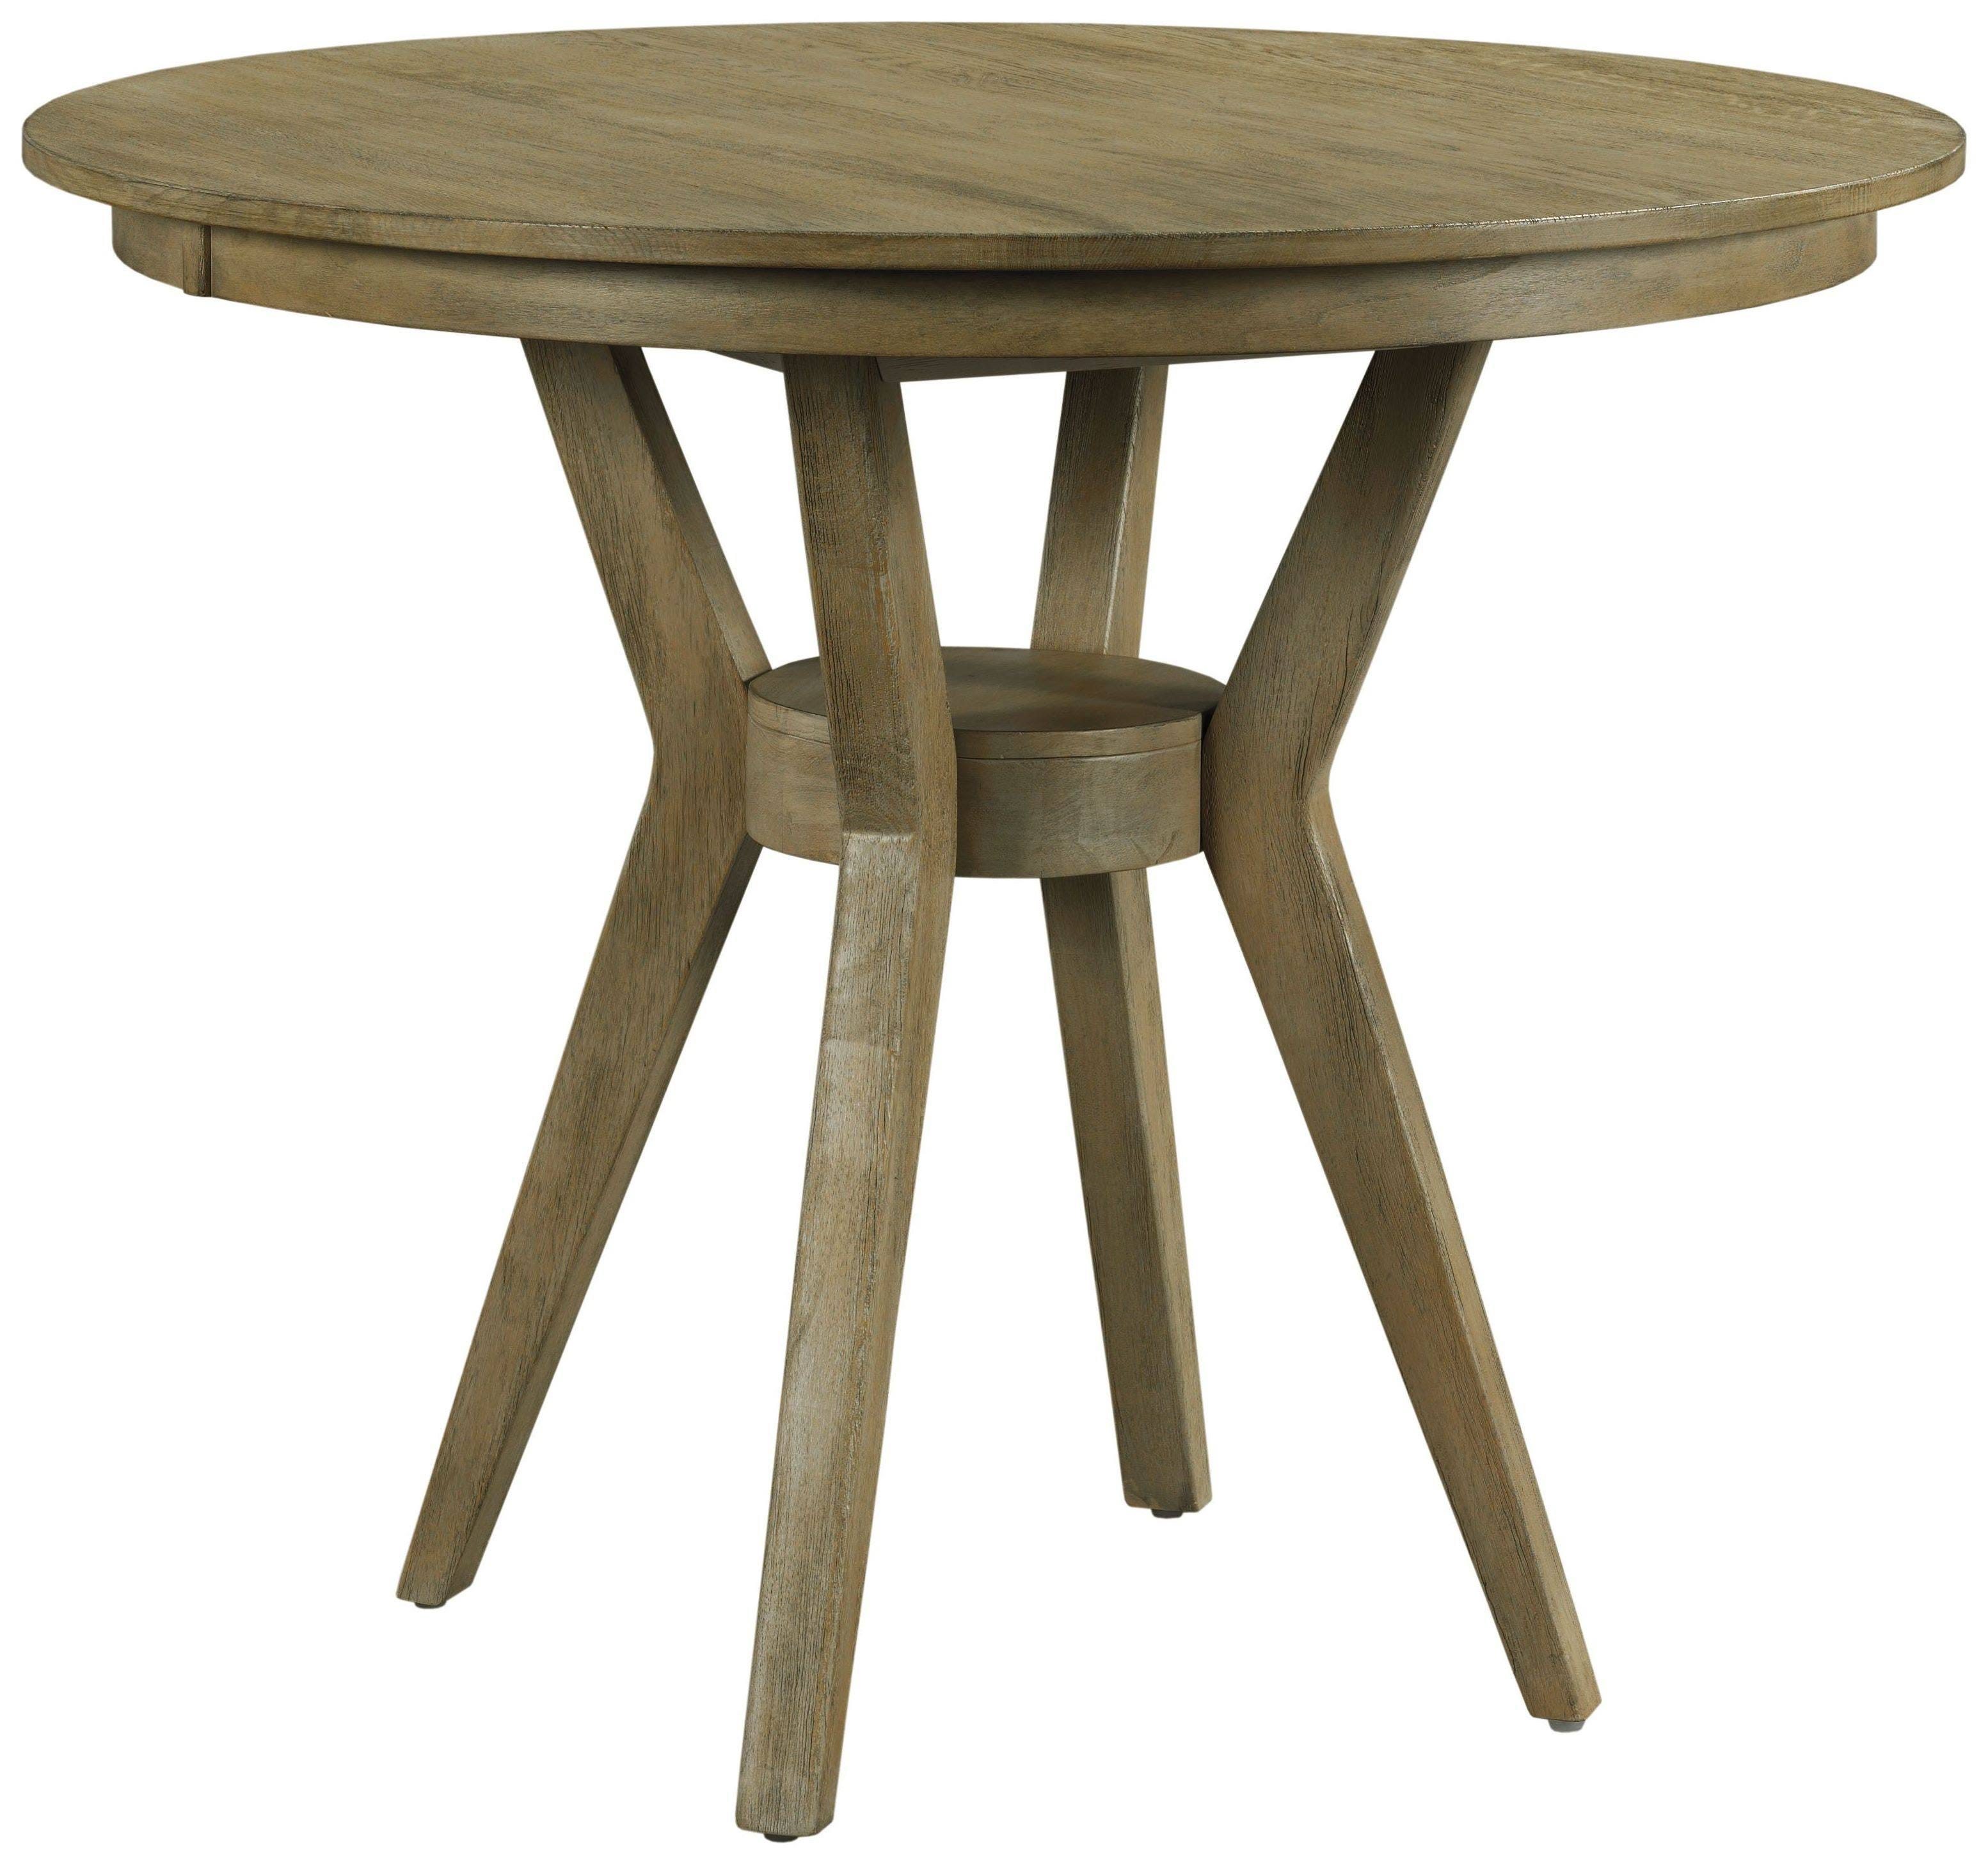 Stylish Modern Booth Dining Table with Oak Finish | Image